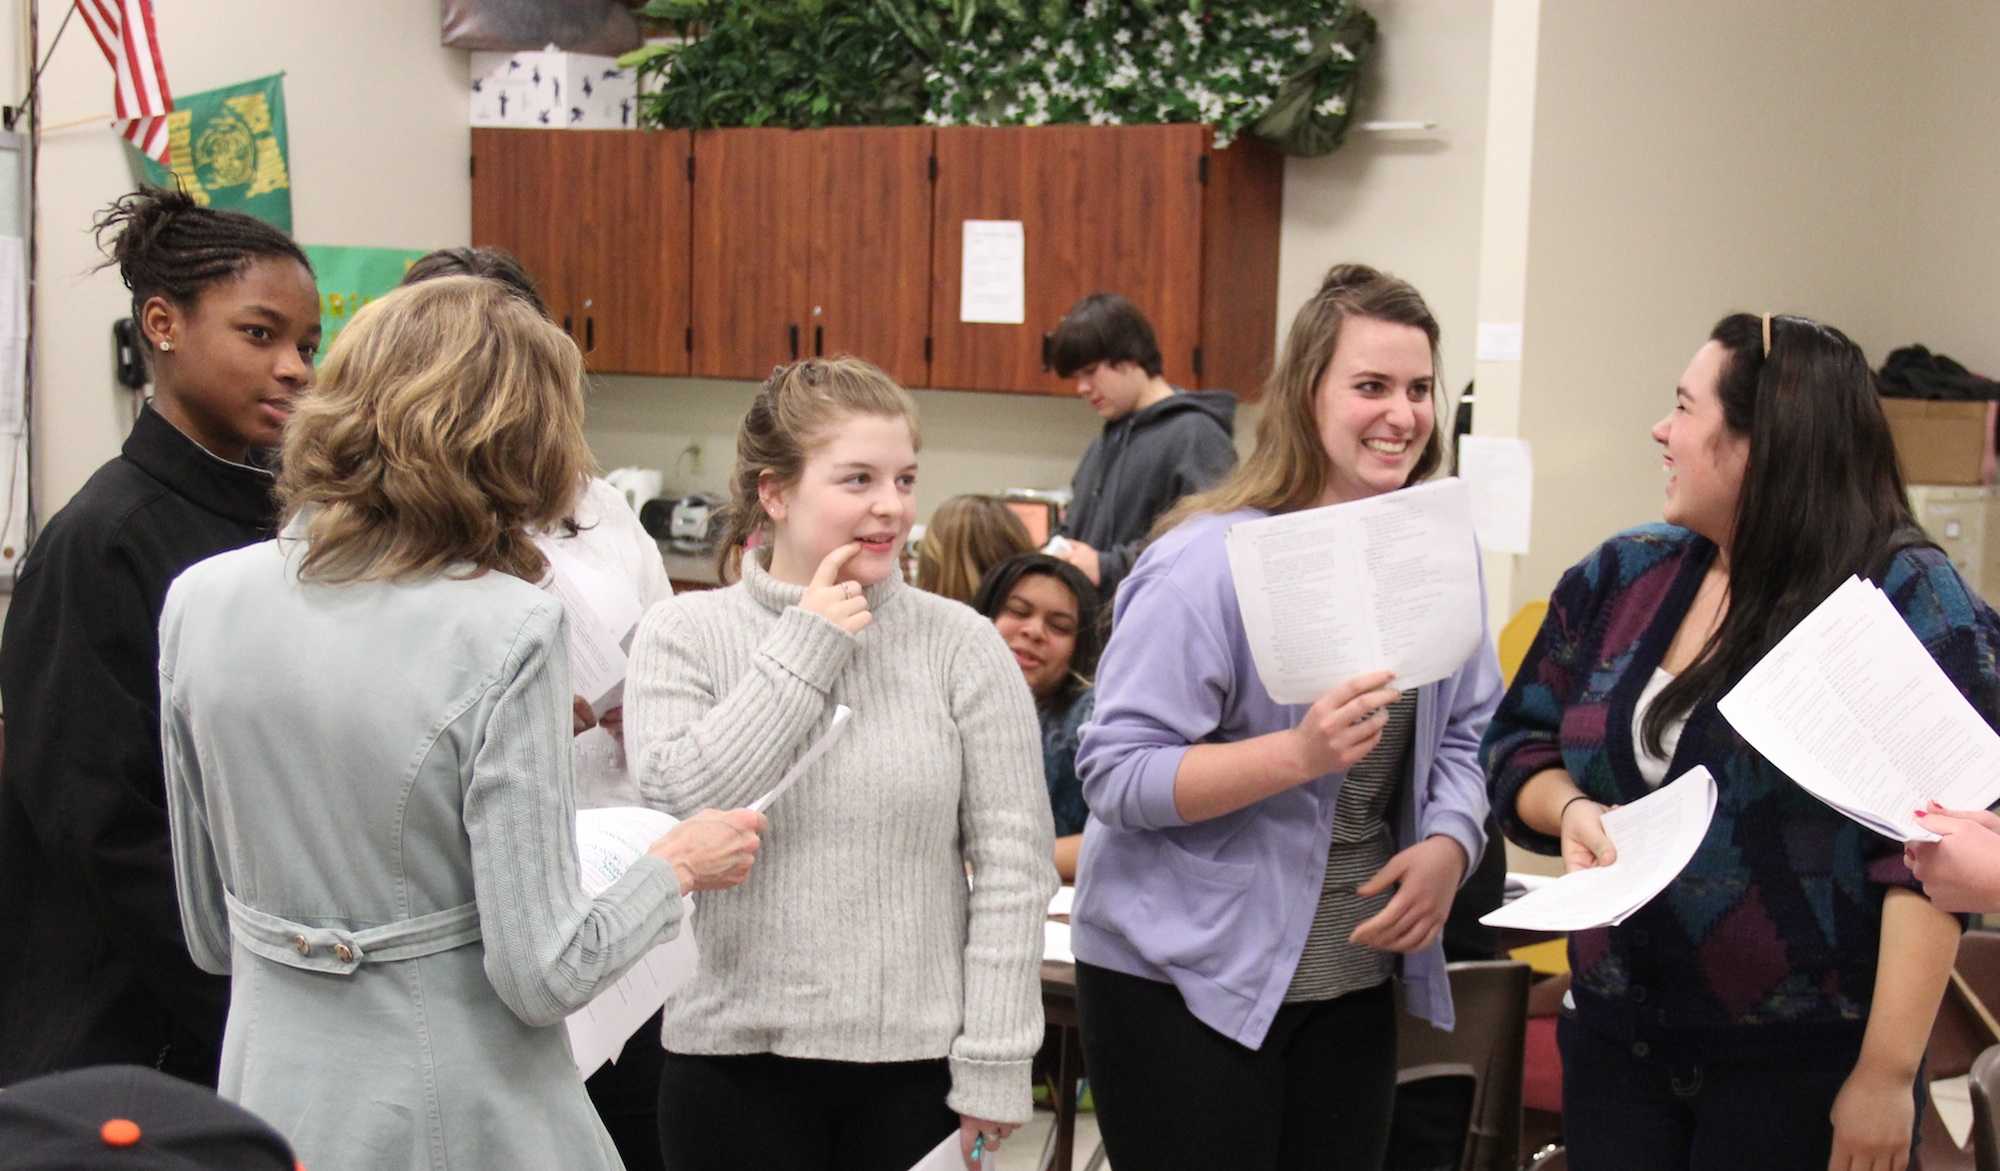 Students looking for a part in Rock Bridge's upcoming production "Midsummer/Jersey" auditioned in Room 408 after school today. Callbacks are scheduled for tomorrow. Photo by Asa Lory